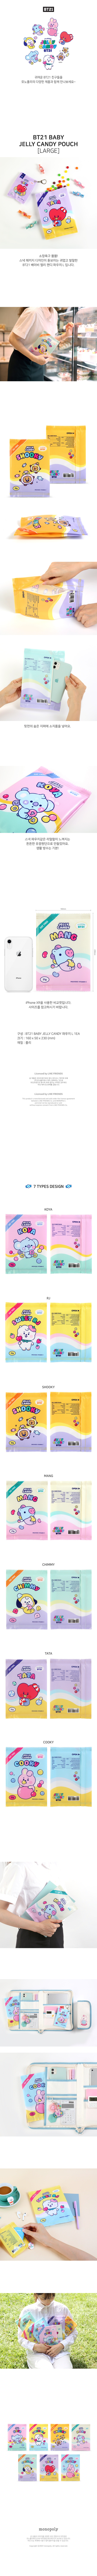 bt21_baby_jelly_candy_pouch_large_sangsae.jpg